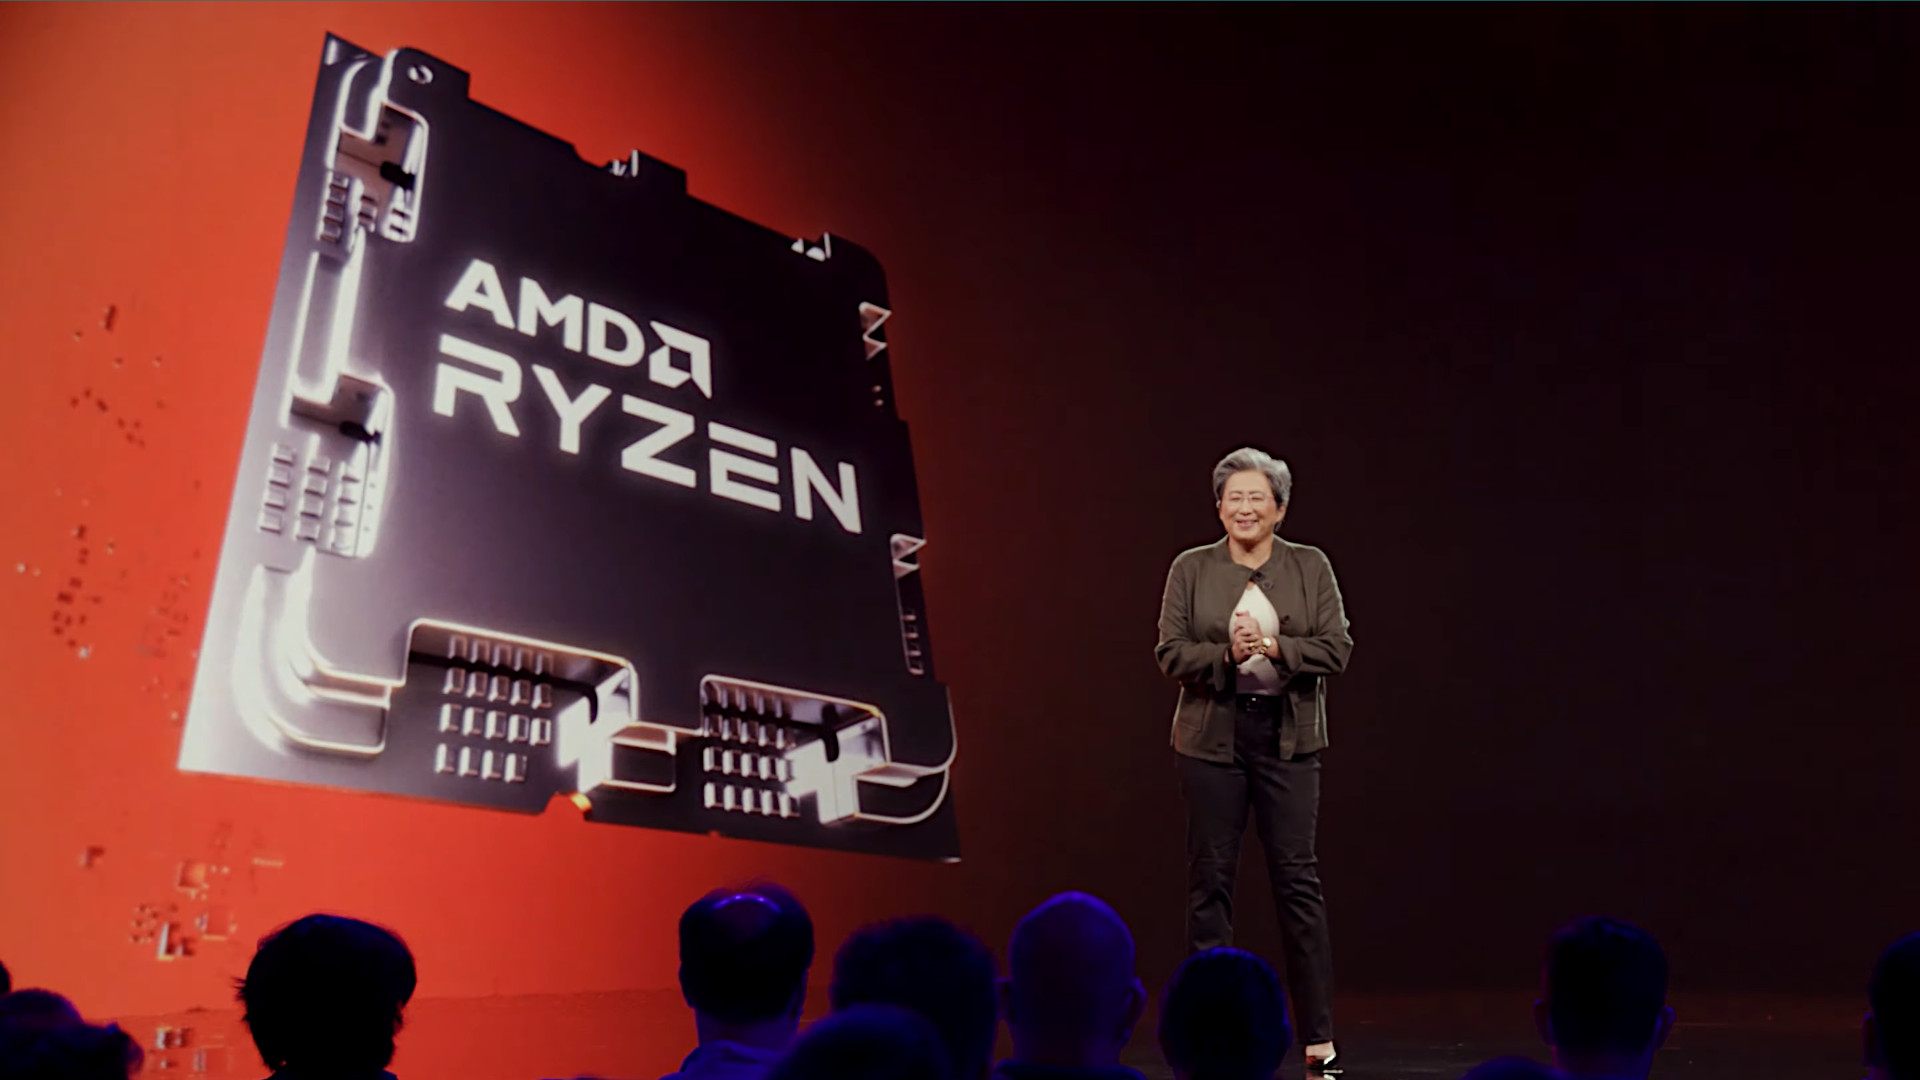 AMD Ryzen 7000 release date confirmed, pricing starts at $299